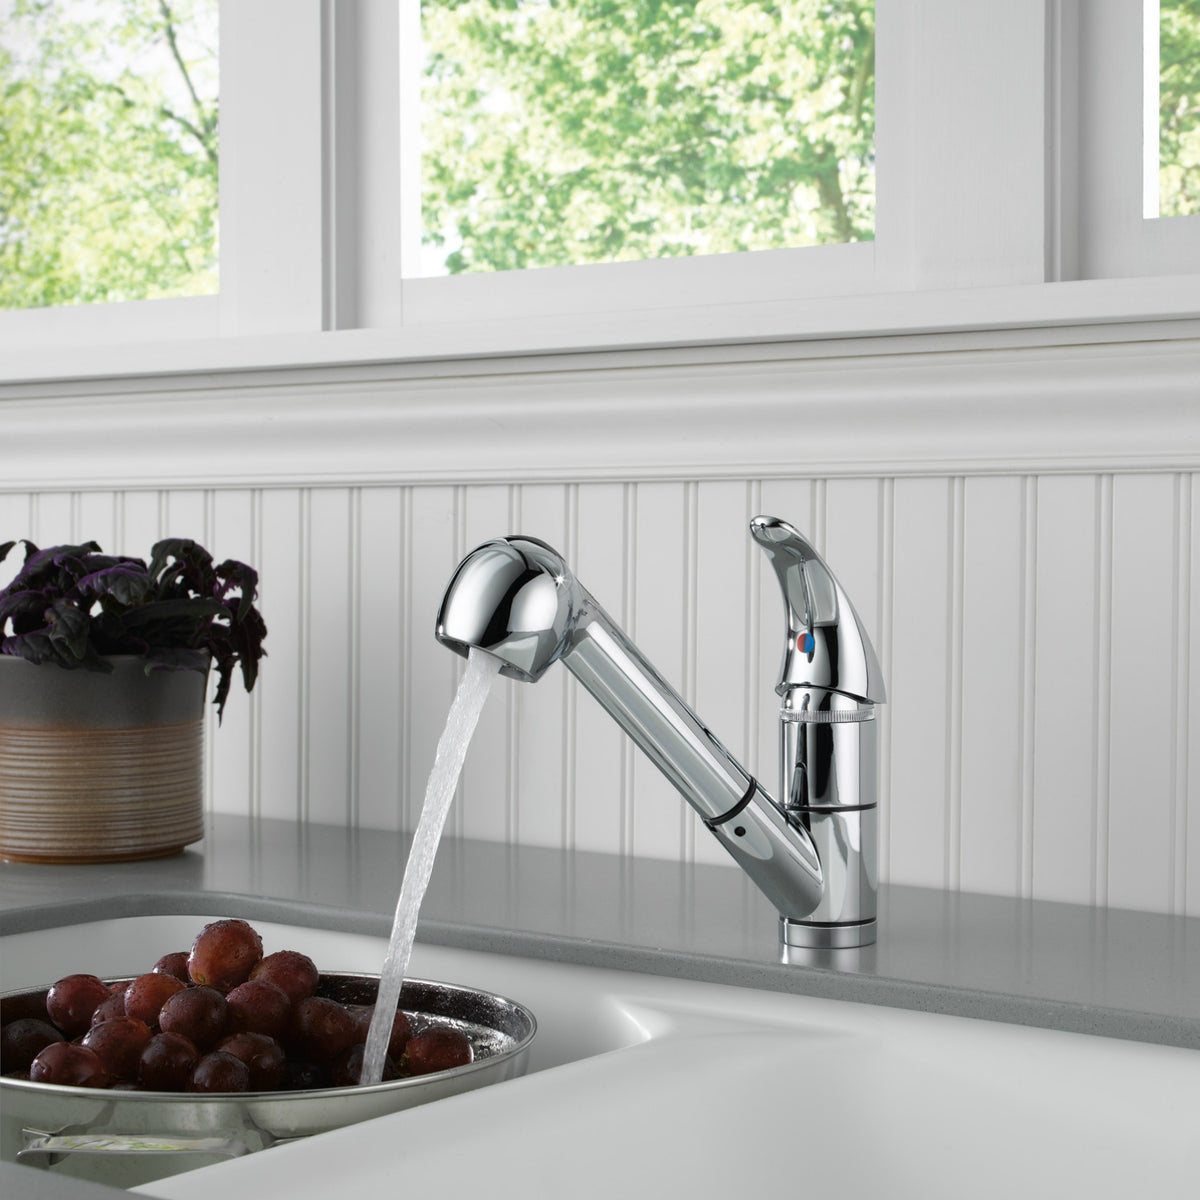 Peerless P18550LF Kitchen Pull-Out Faucet, Single Lever, Chrome Finish, 1.80 GPM